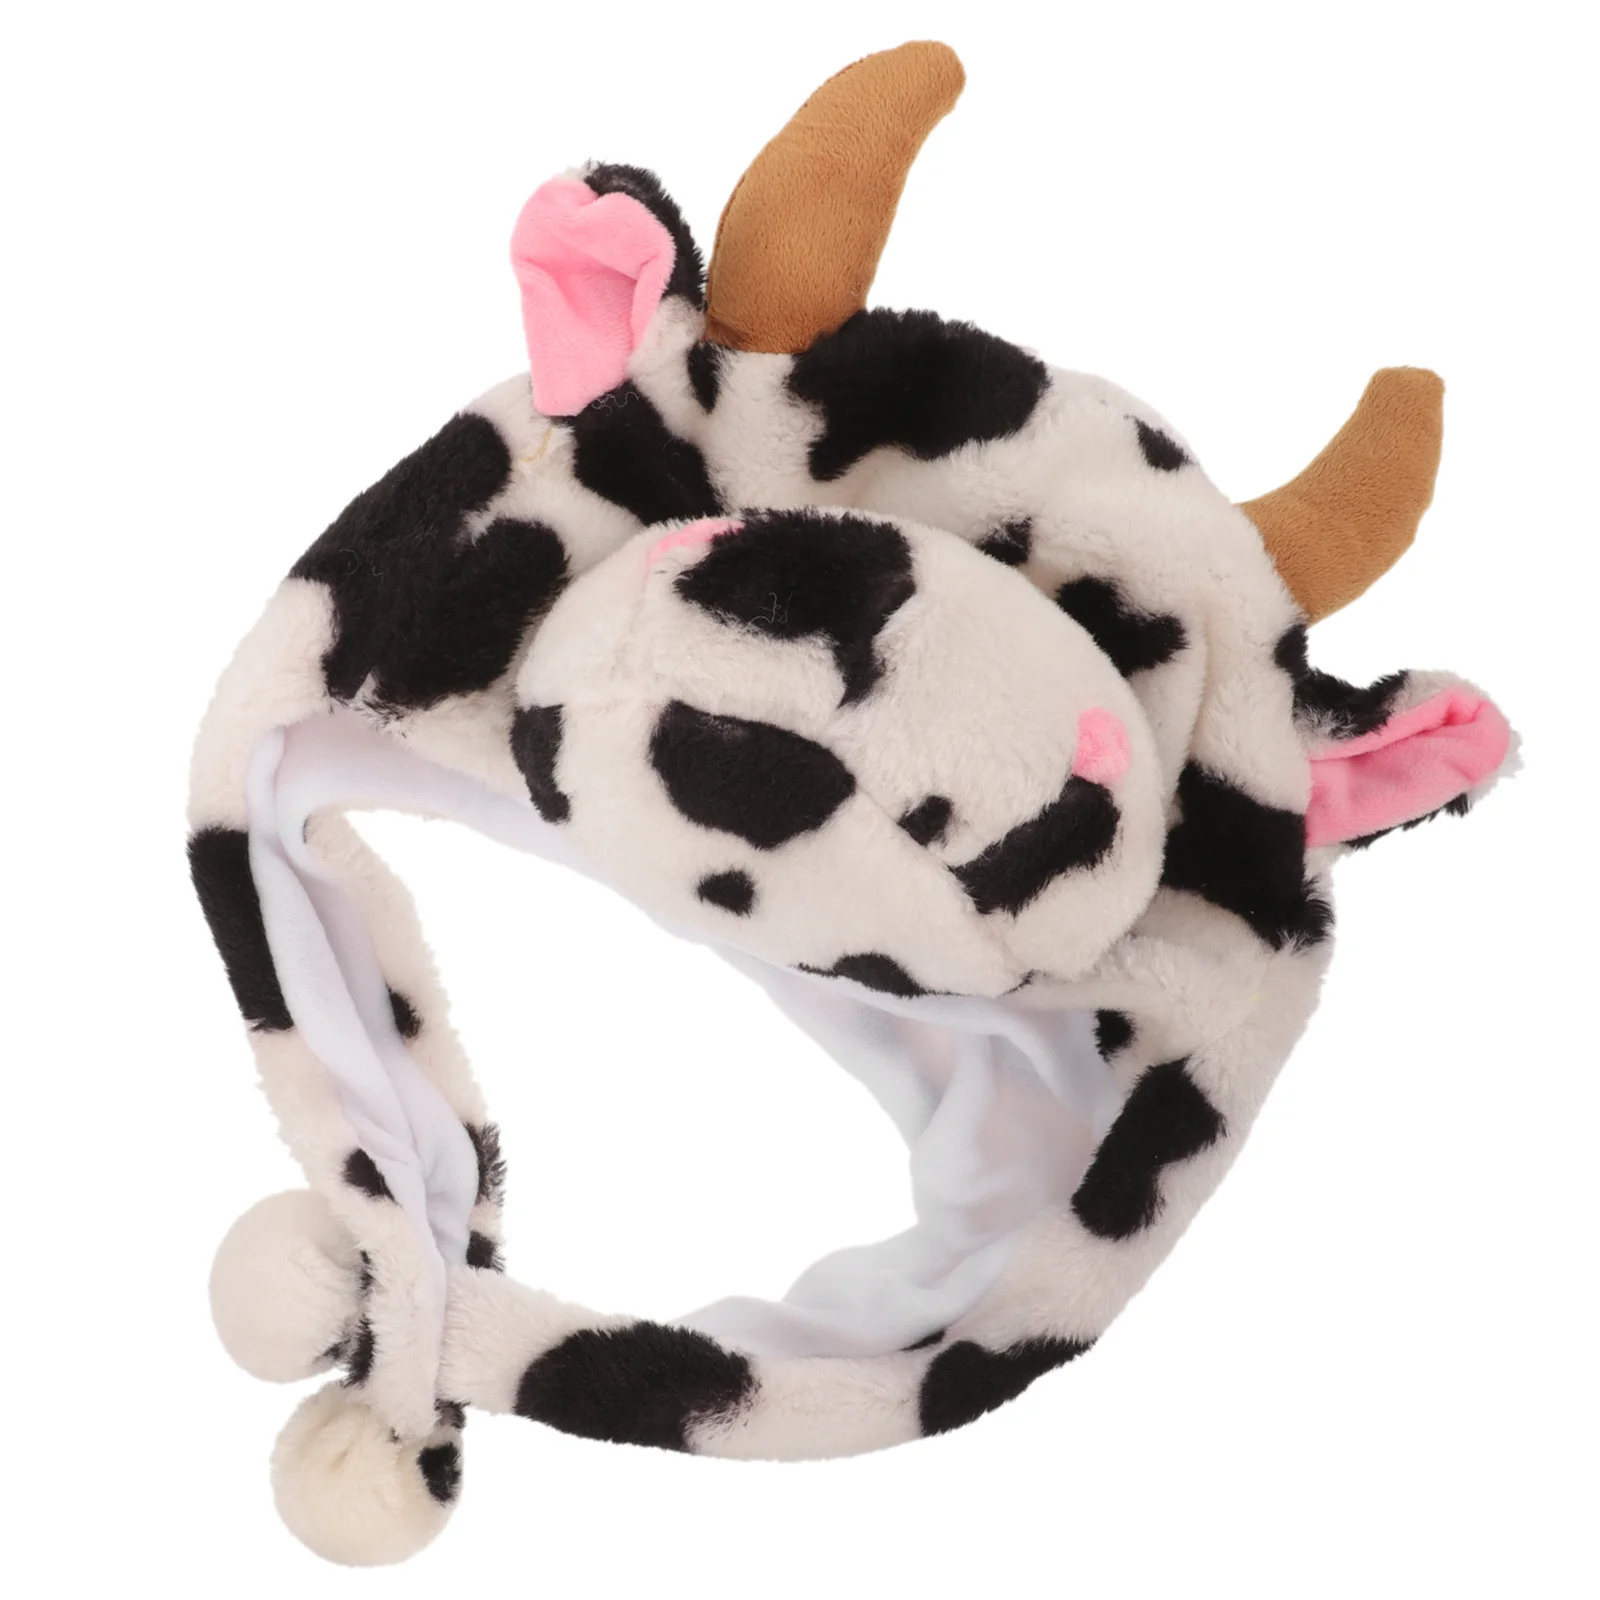 Plush Animal Hat Cow Ears Hat Warm Cow Horn Hat Decorative Cow Hat for Women